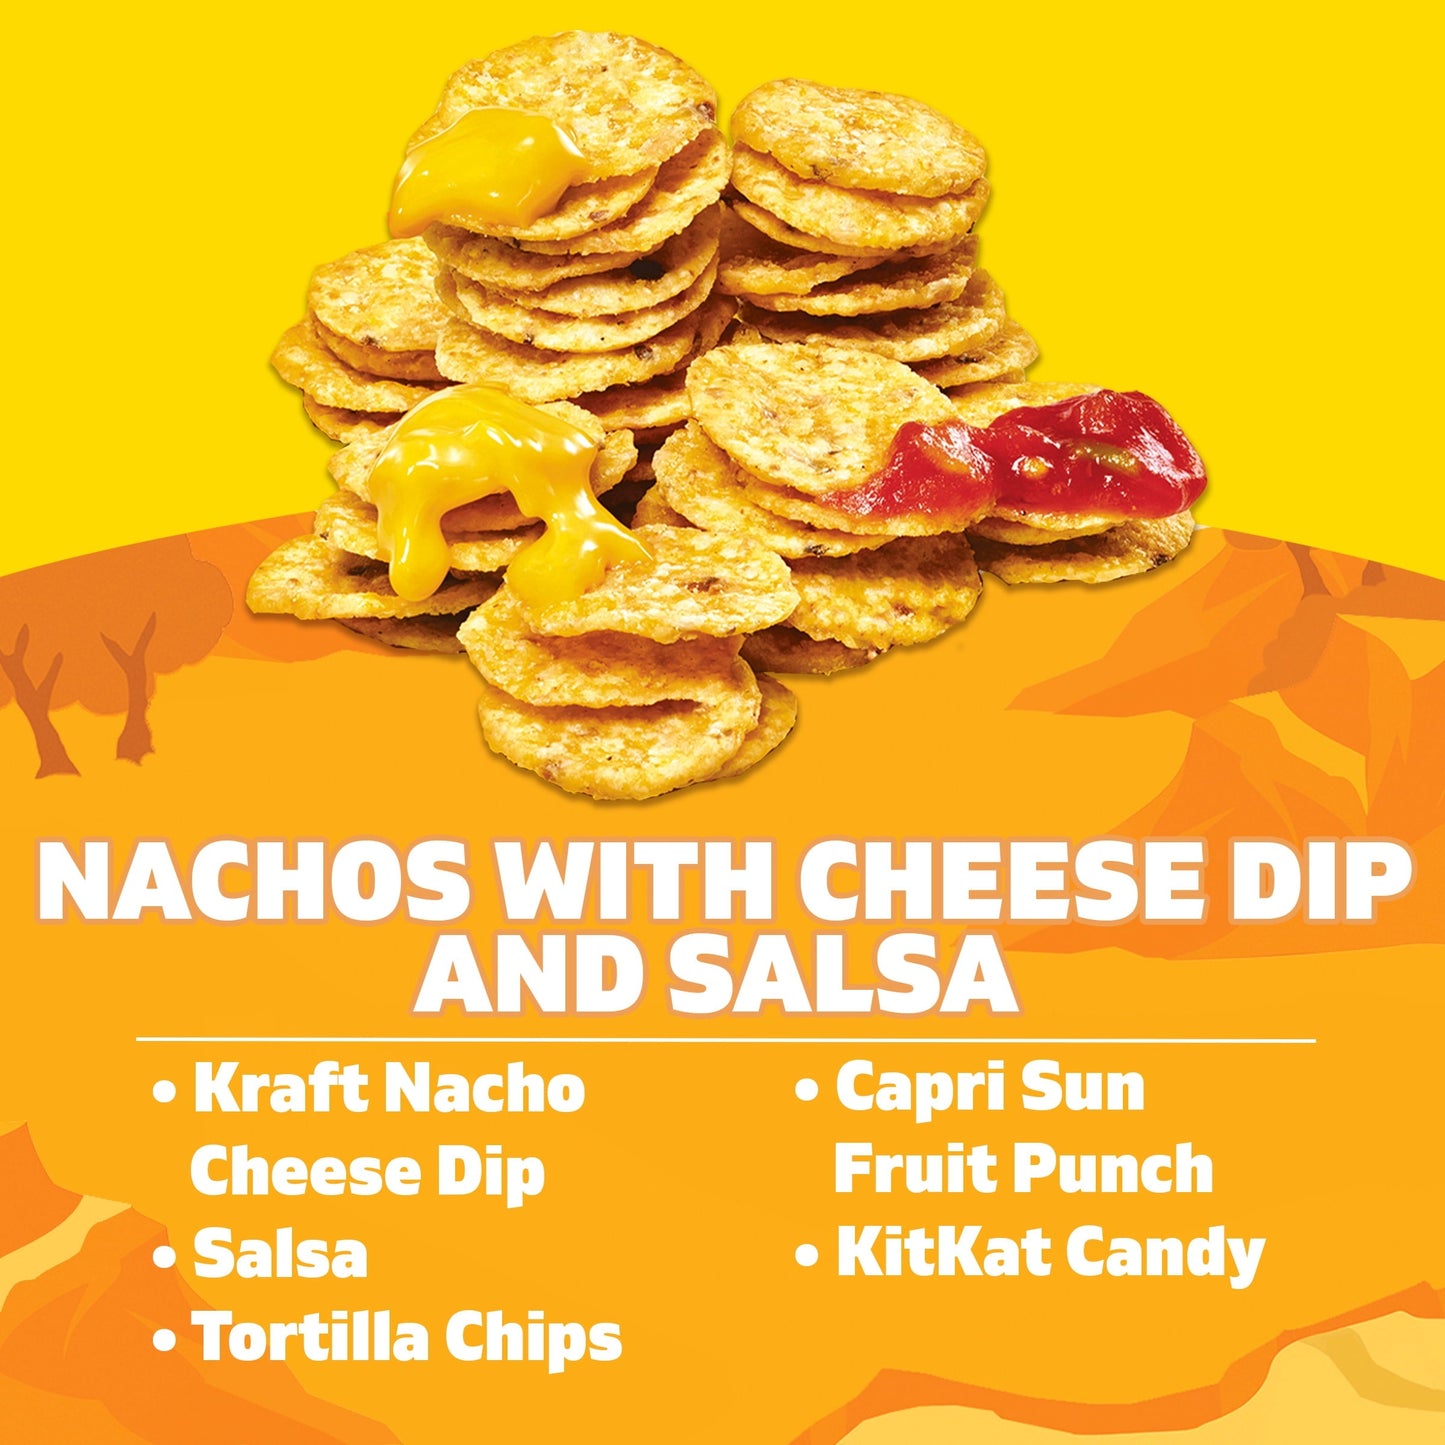 Lunchables Nachos Cheese Dip & Salsa Kids Lunch Meal Kit, 10.7 oz Box